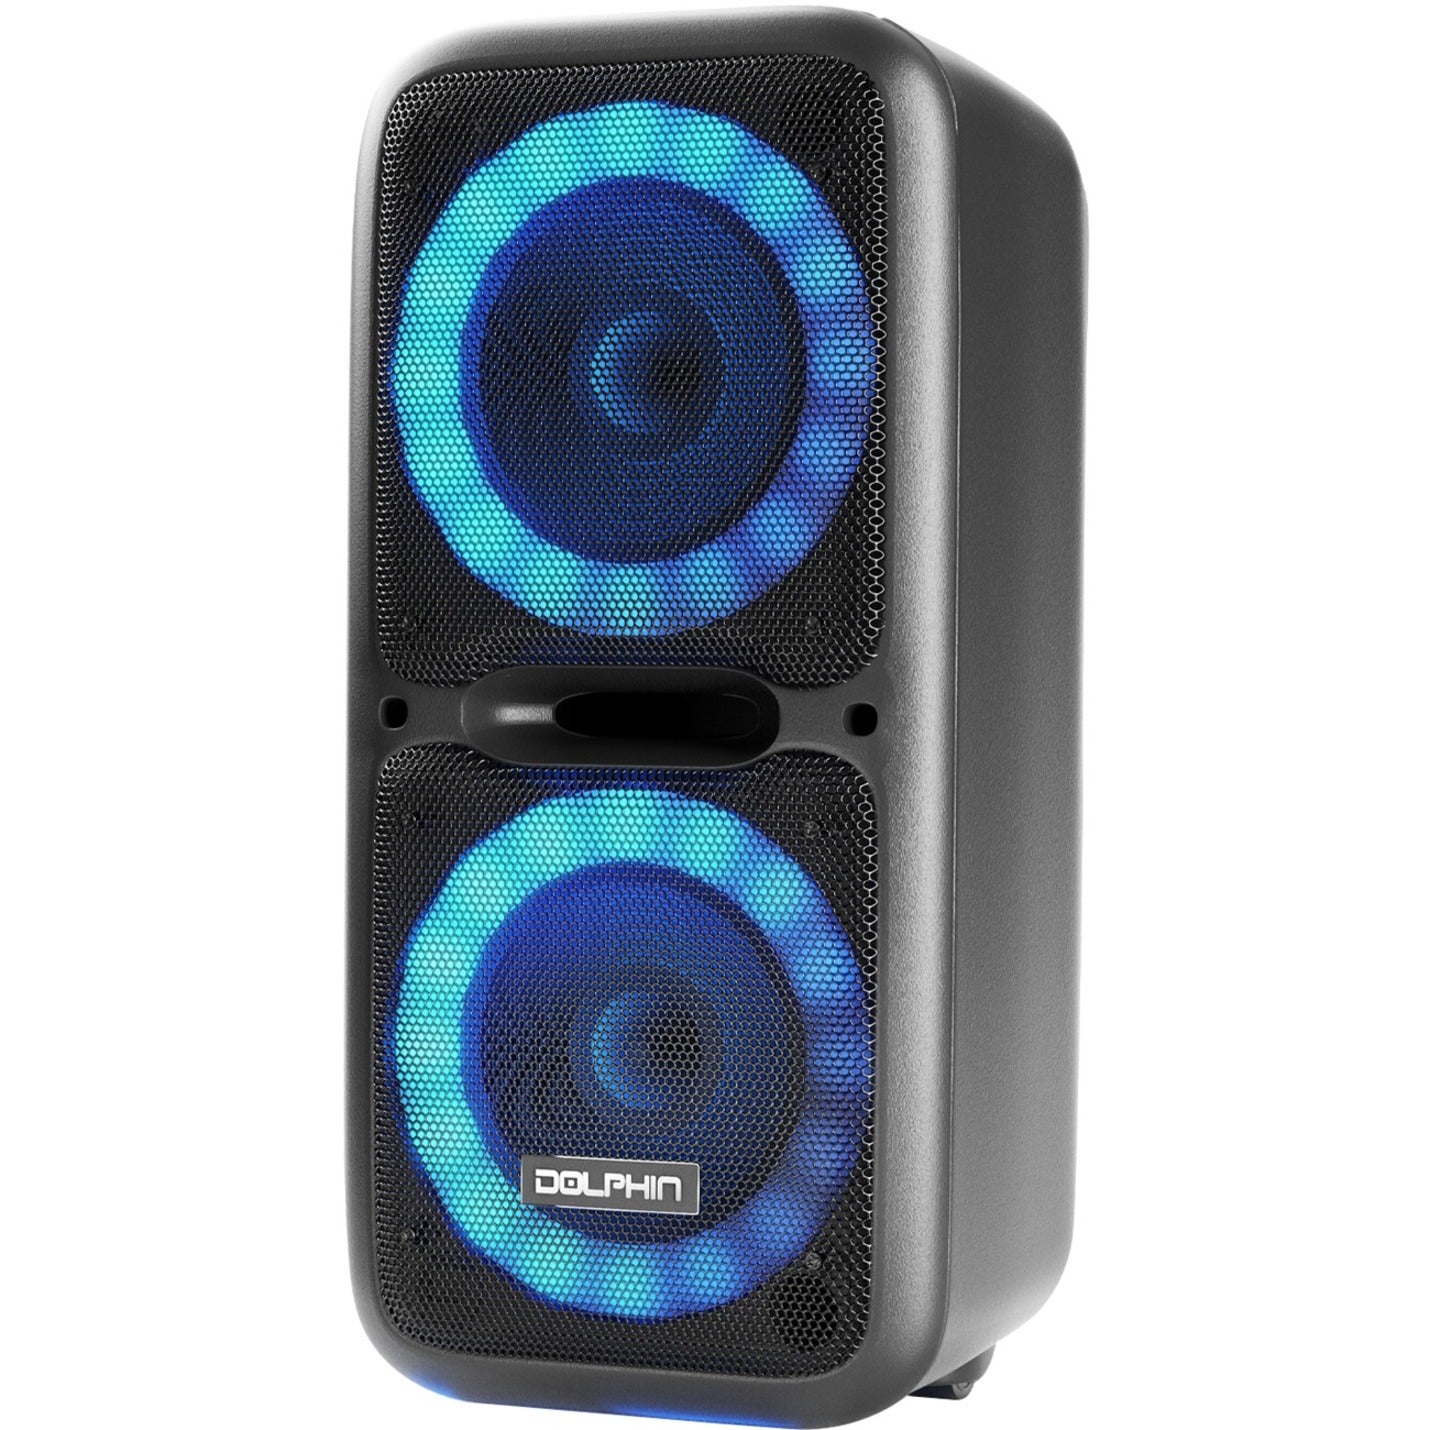 Dolphin Audio SP-2120RBT 12-Inch Dual Rechargeable Party Speaker [Discontinued]